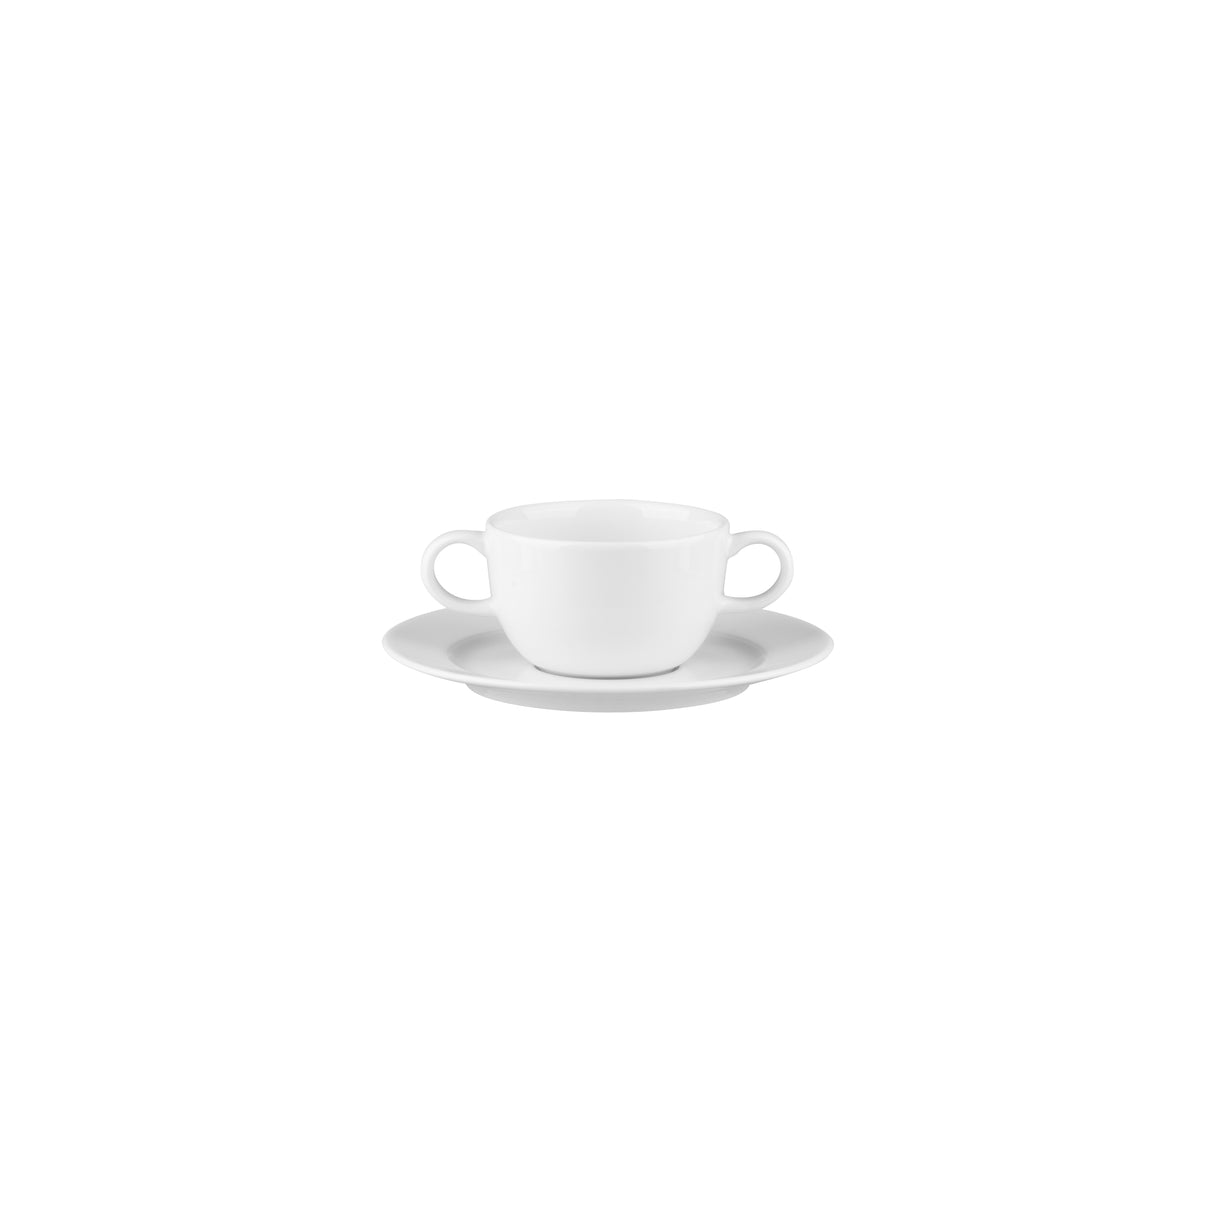 Double Handled Soup Bowl - 300Ml, Prelude: Pack of 24